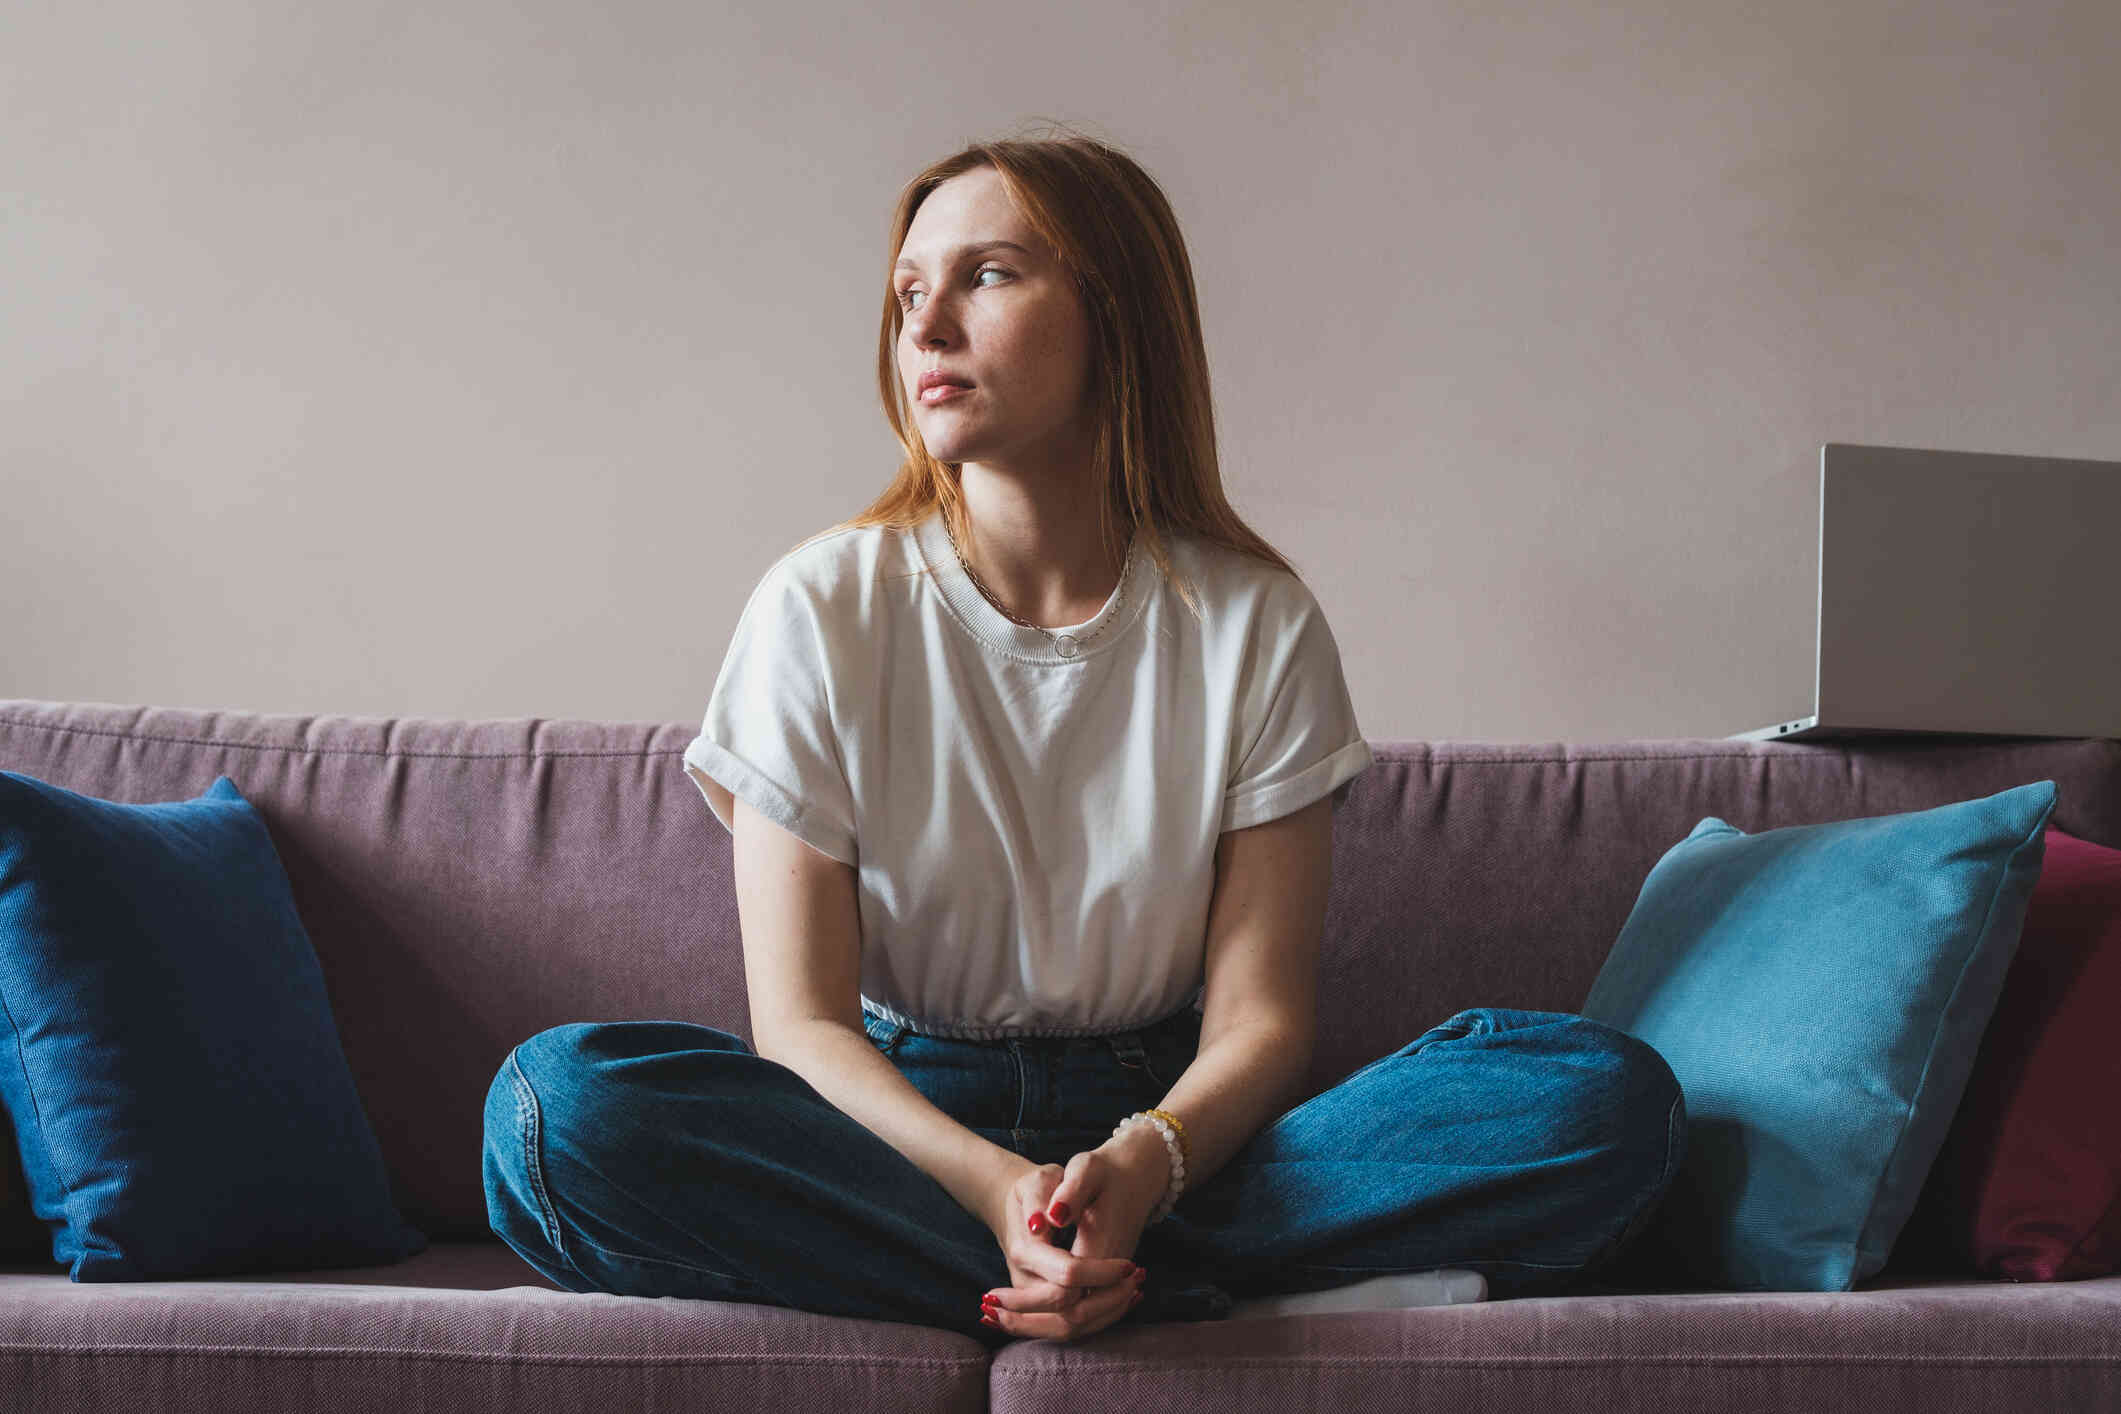 A woman in a white shirt sits crosslegged on the couch while gazing off sadly.